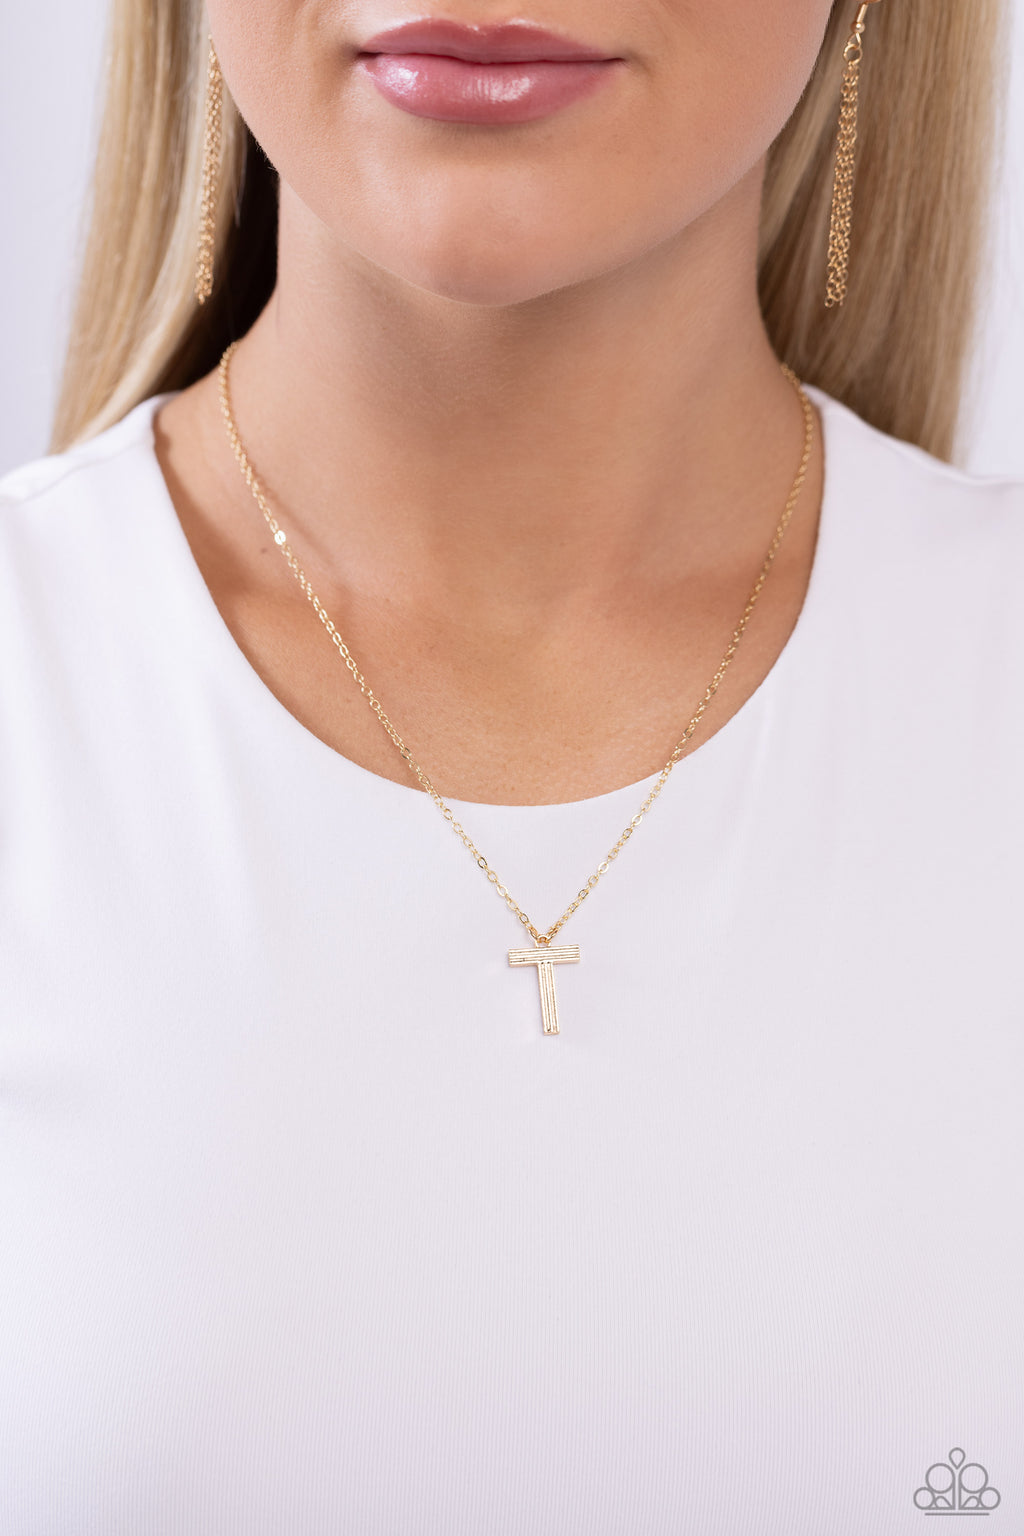 Paparazzi - Leave Your Initials - Gold - T Necklace